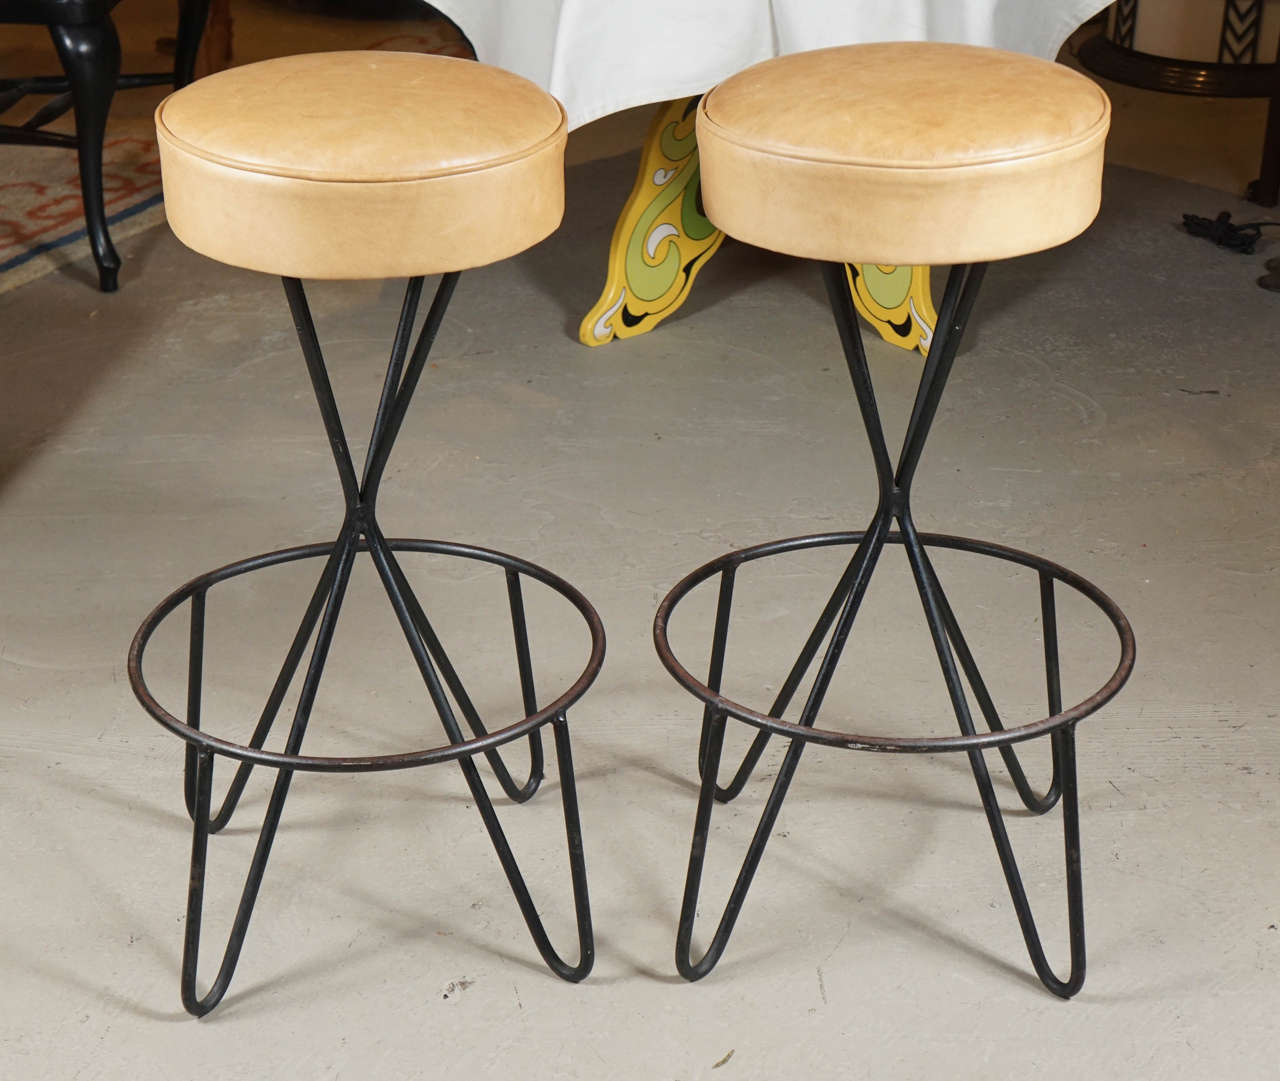 Pair of wrought iron bar stools in the style of Weinberg. Generous foot ring and new leather swiveling seats.